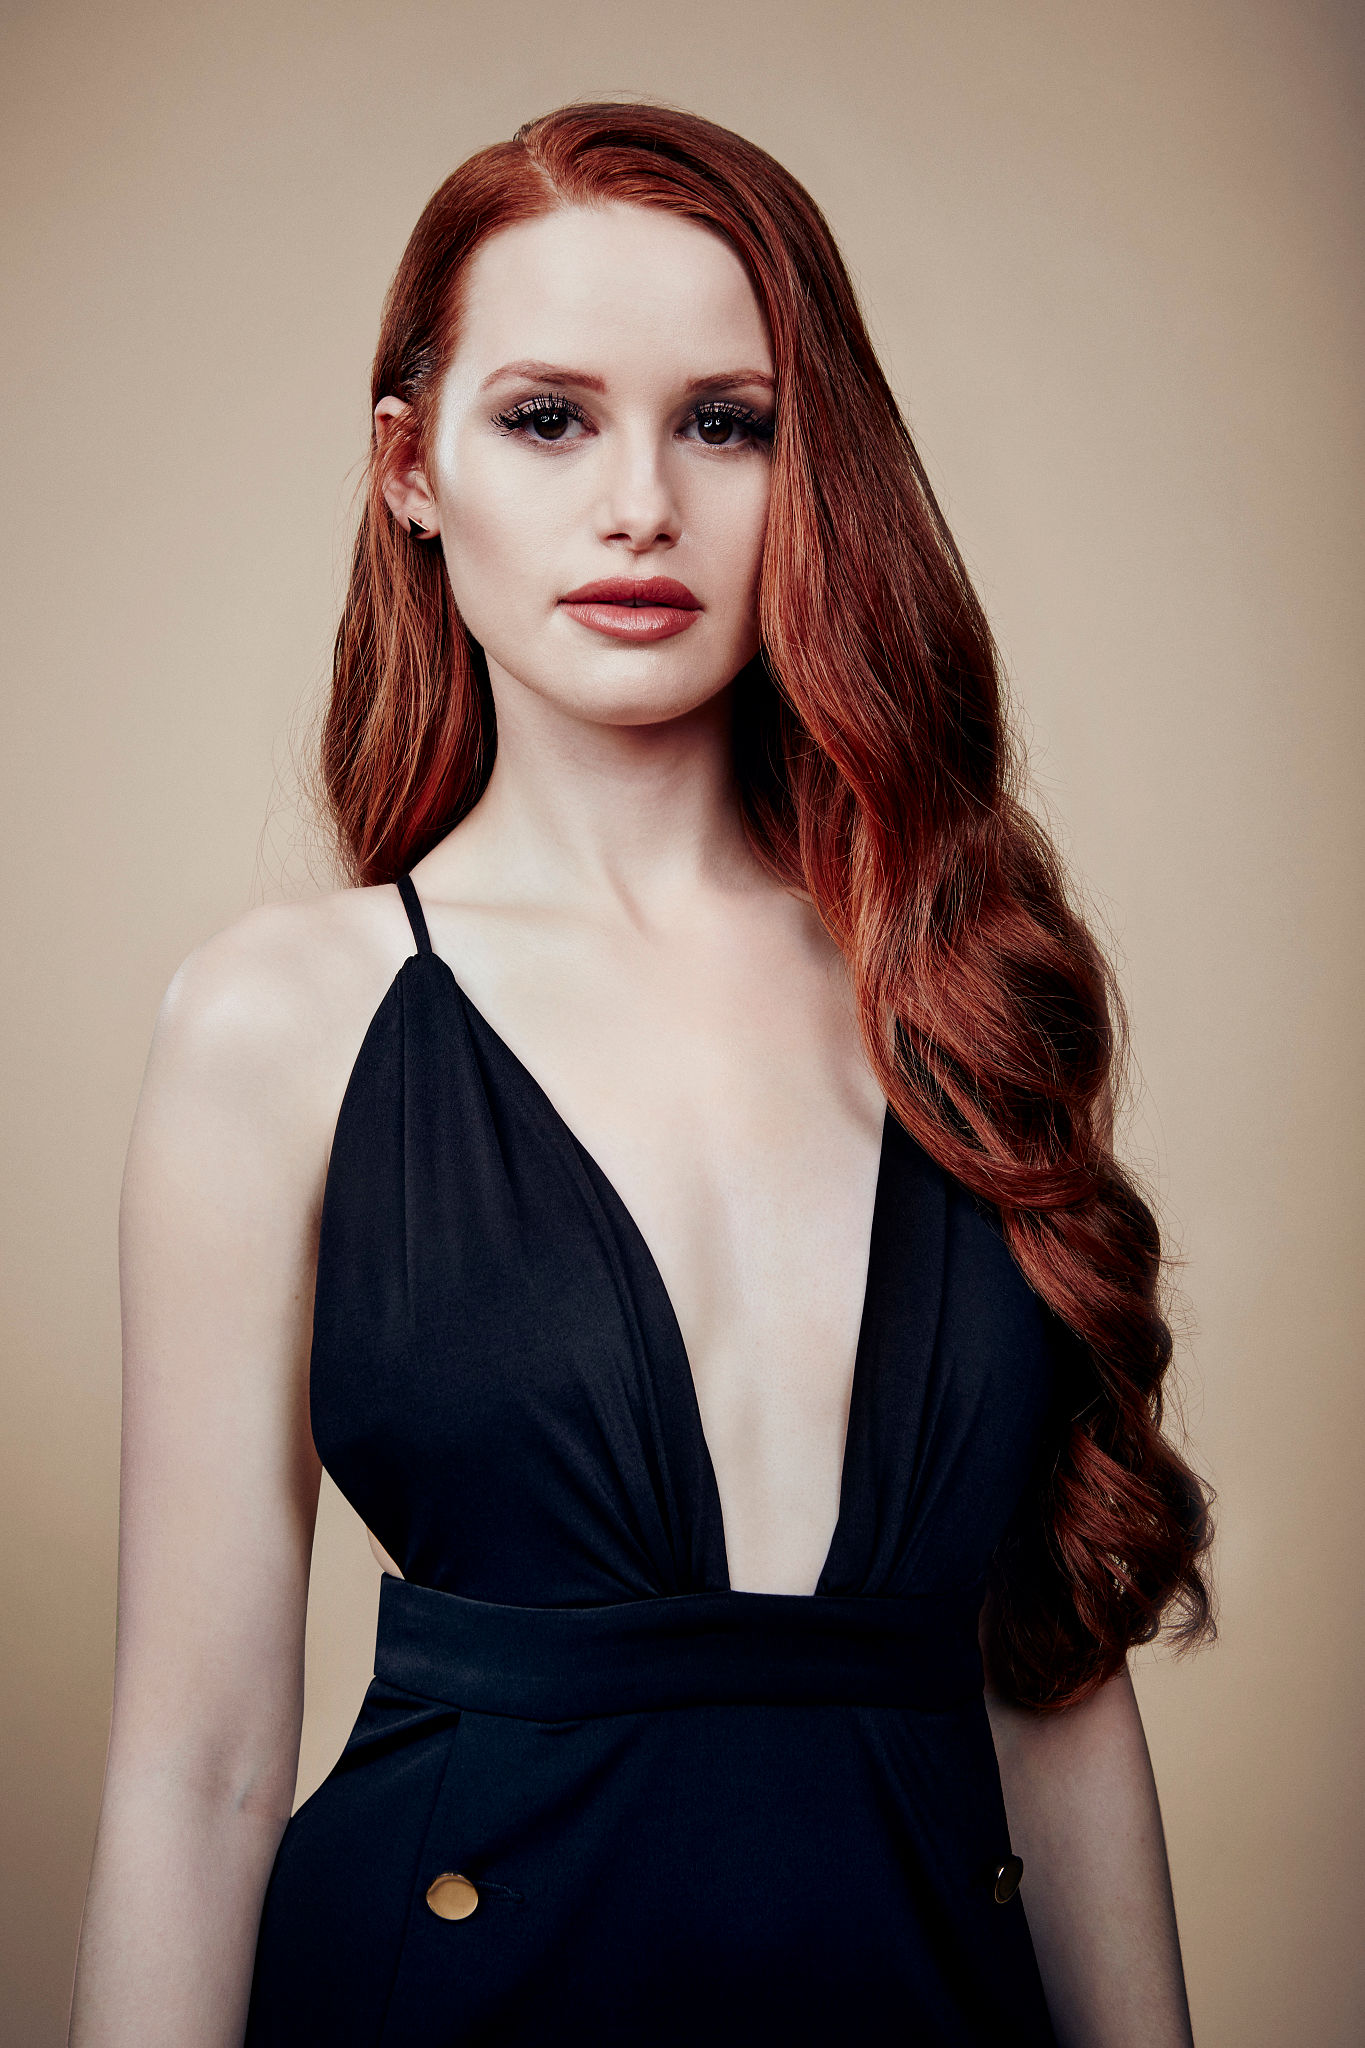 Assemblage of the Naughtiest Madelaine Petsch Pictures in HQ